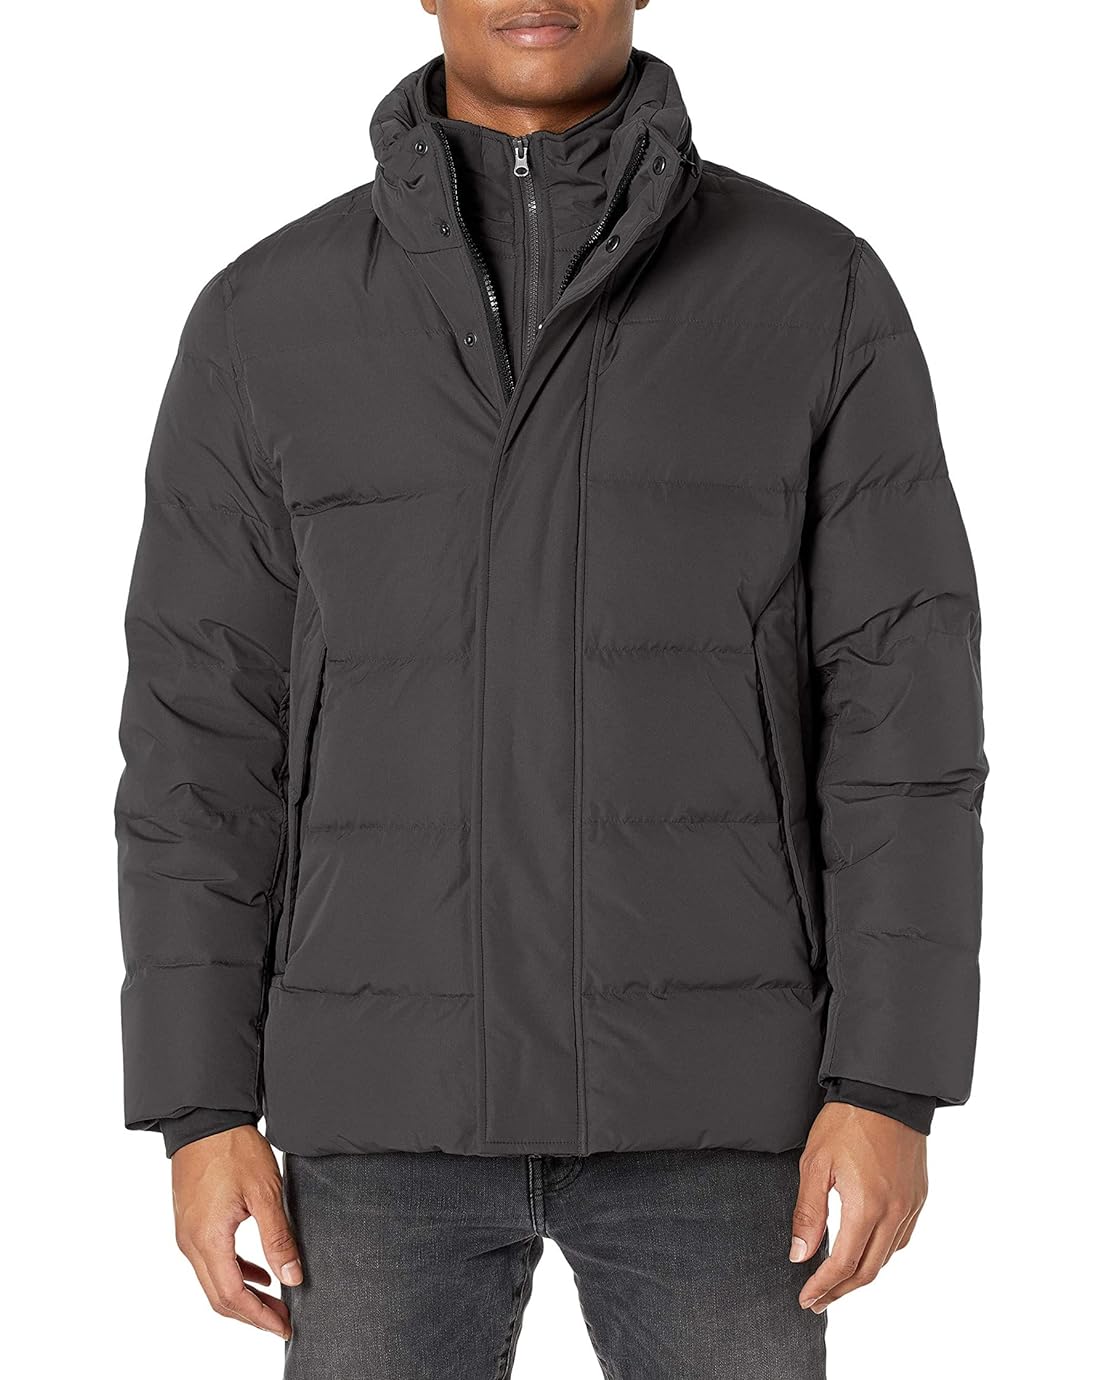 Marc New York by Andrew Marc Mens Stratus 315 Down Ajcket with Hidden Hood, Attached Bib and Neoprene Details